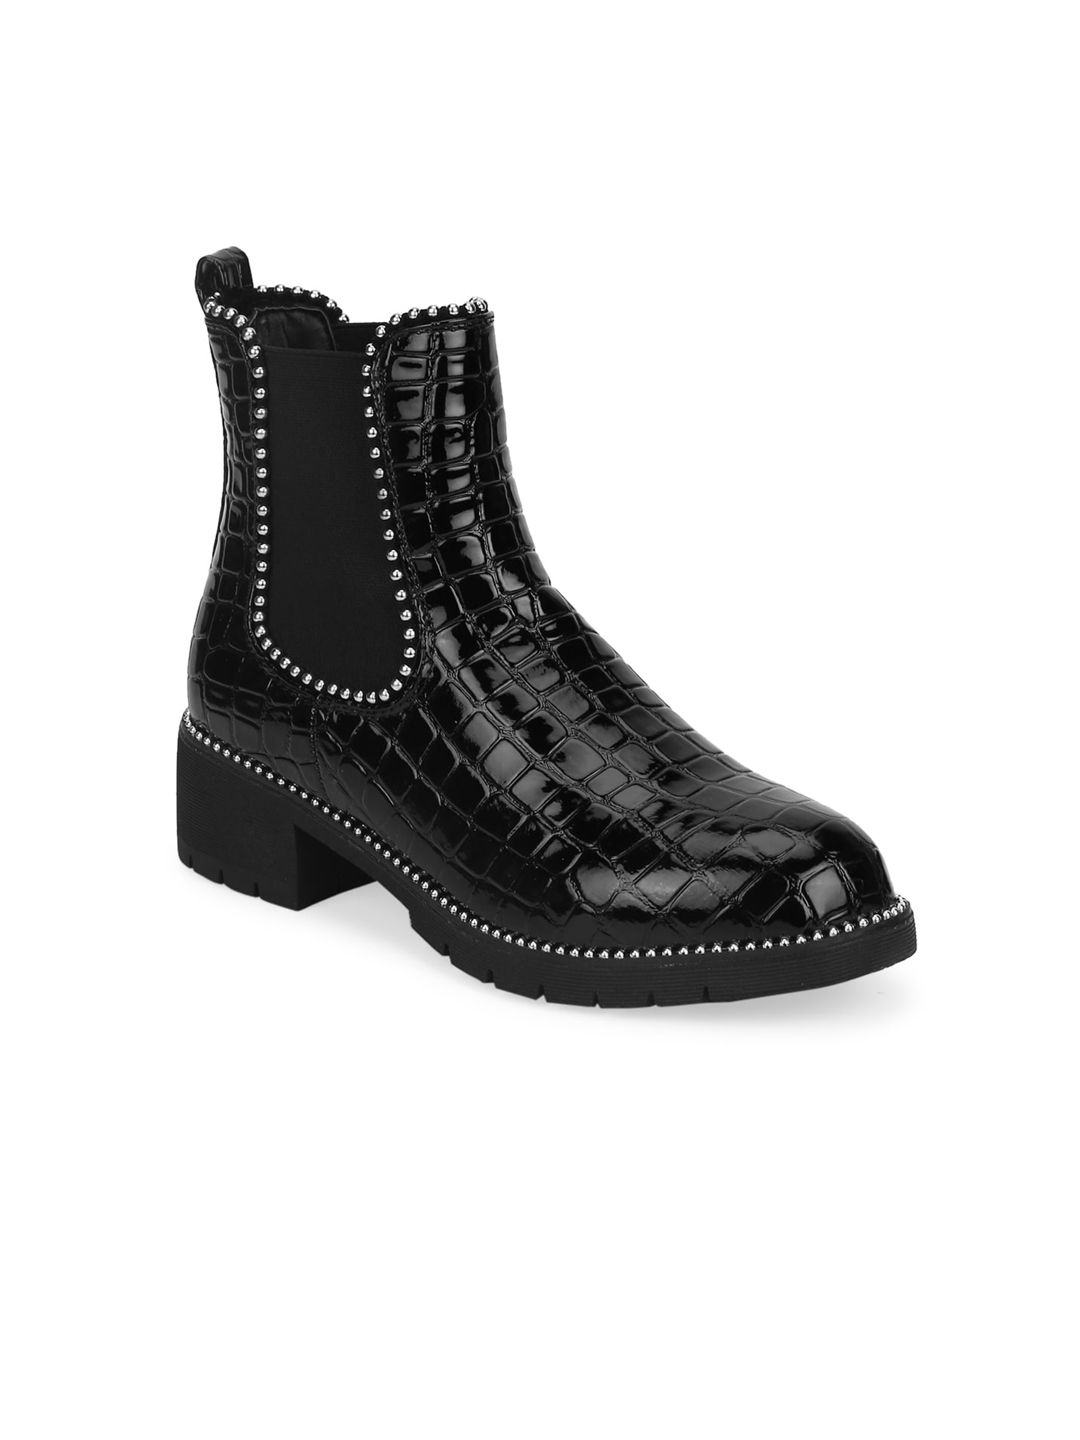 Truffle Collection Black Textured Block Heeled Boots Price in India